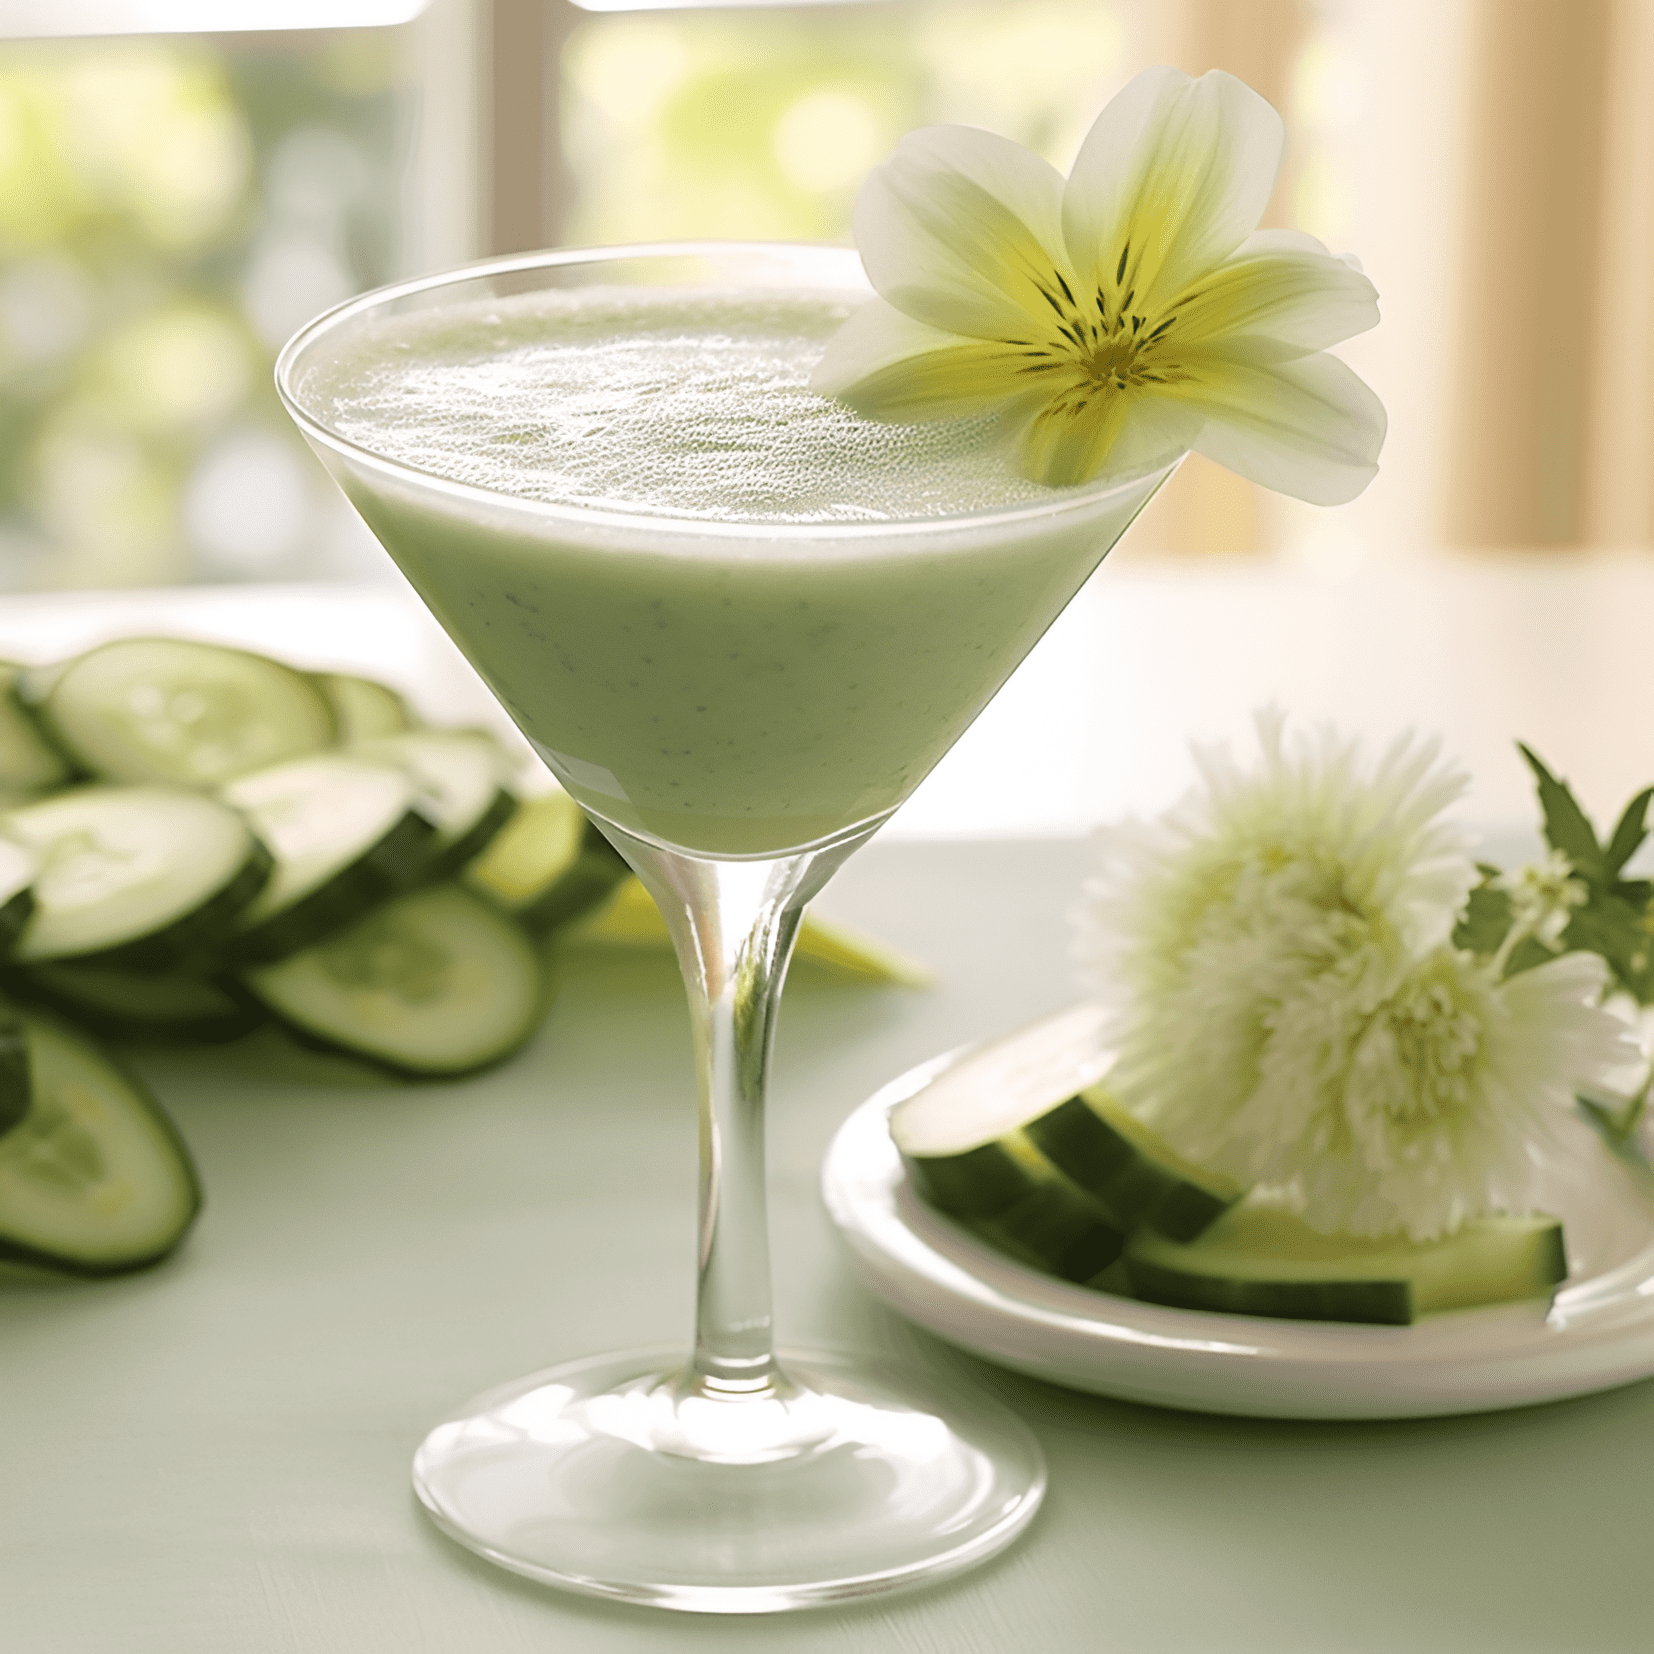 The Cucumber Gimlet has a light, crisp, and refreshing taste with a subtle sweetness. The combination of gin, lime juice, and cucumber creates a harmonious balance of flavors, while the simple syrup adds just the right amount of sweetness to complement the tartness of the lime.